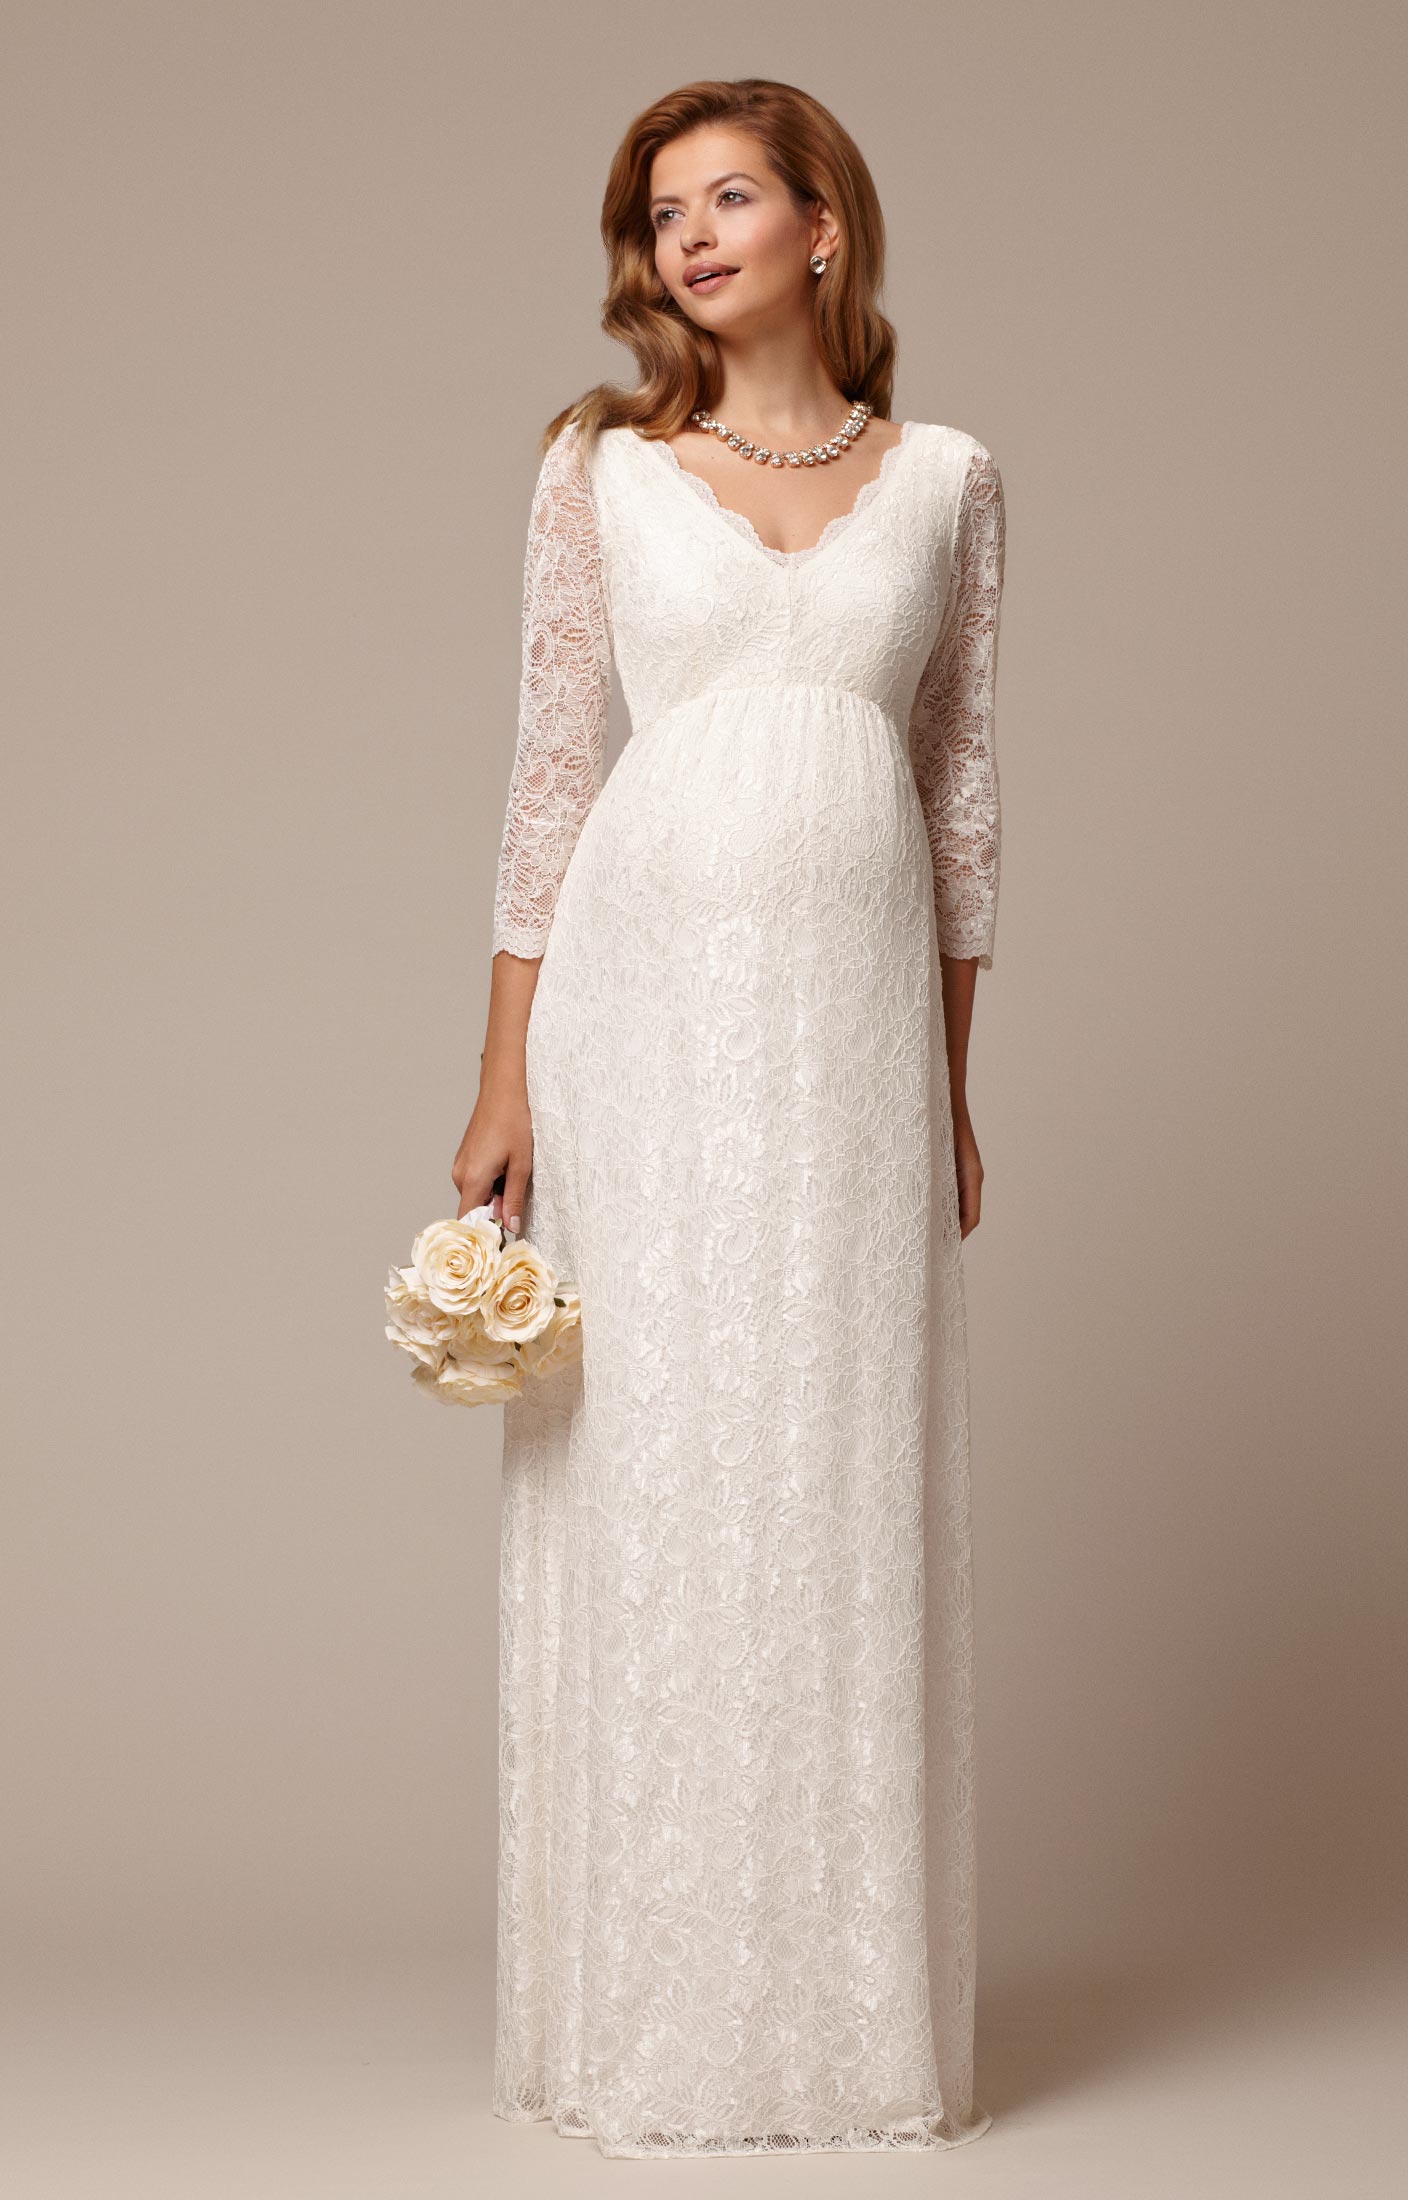 Tiffany Rose Ivory Lace Maternity Gown Chloe